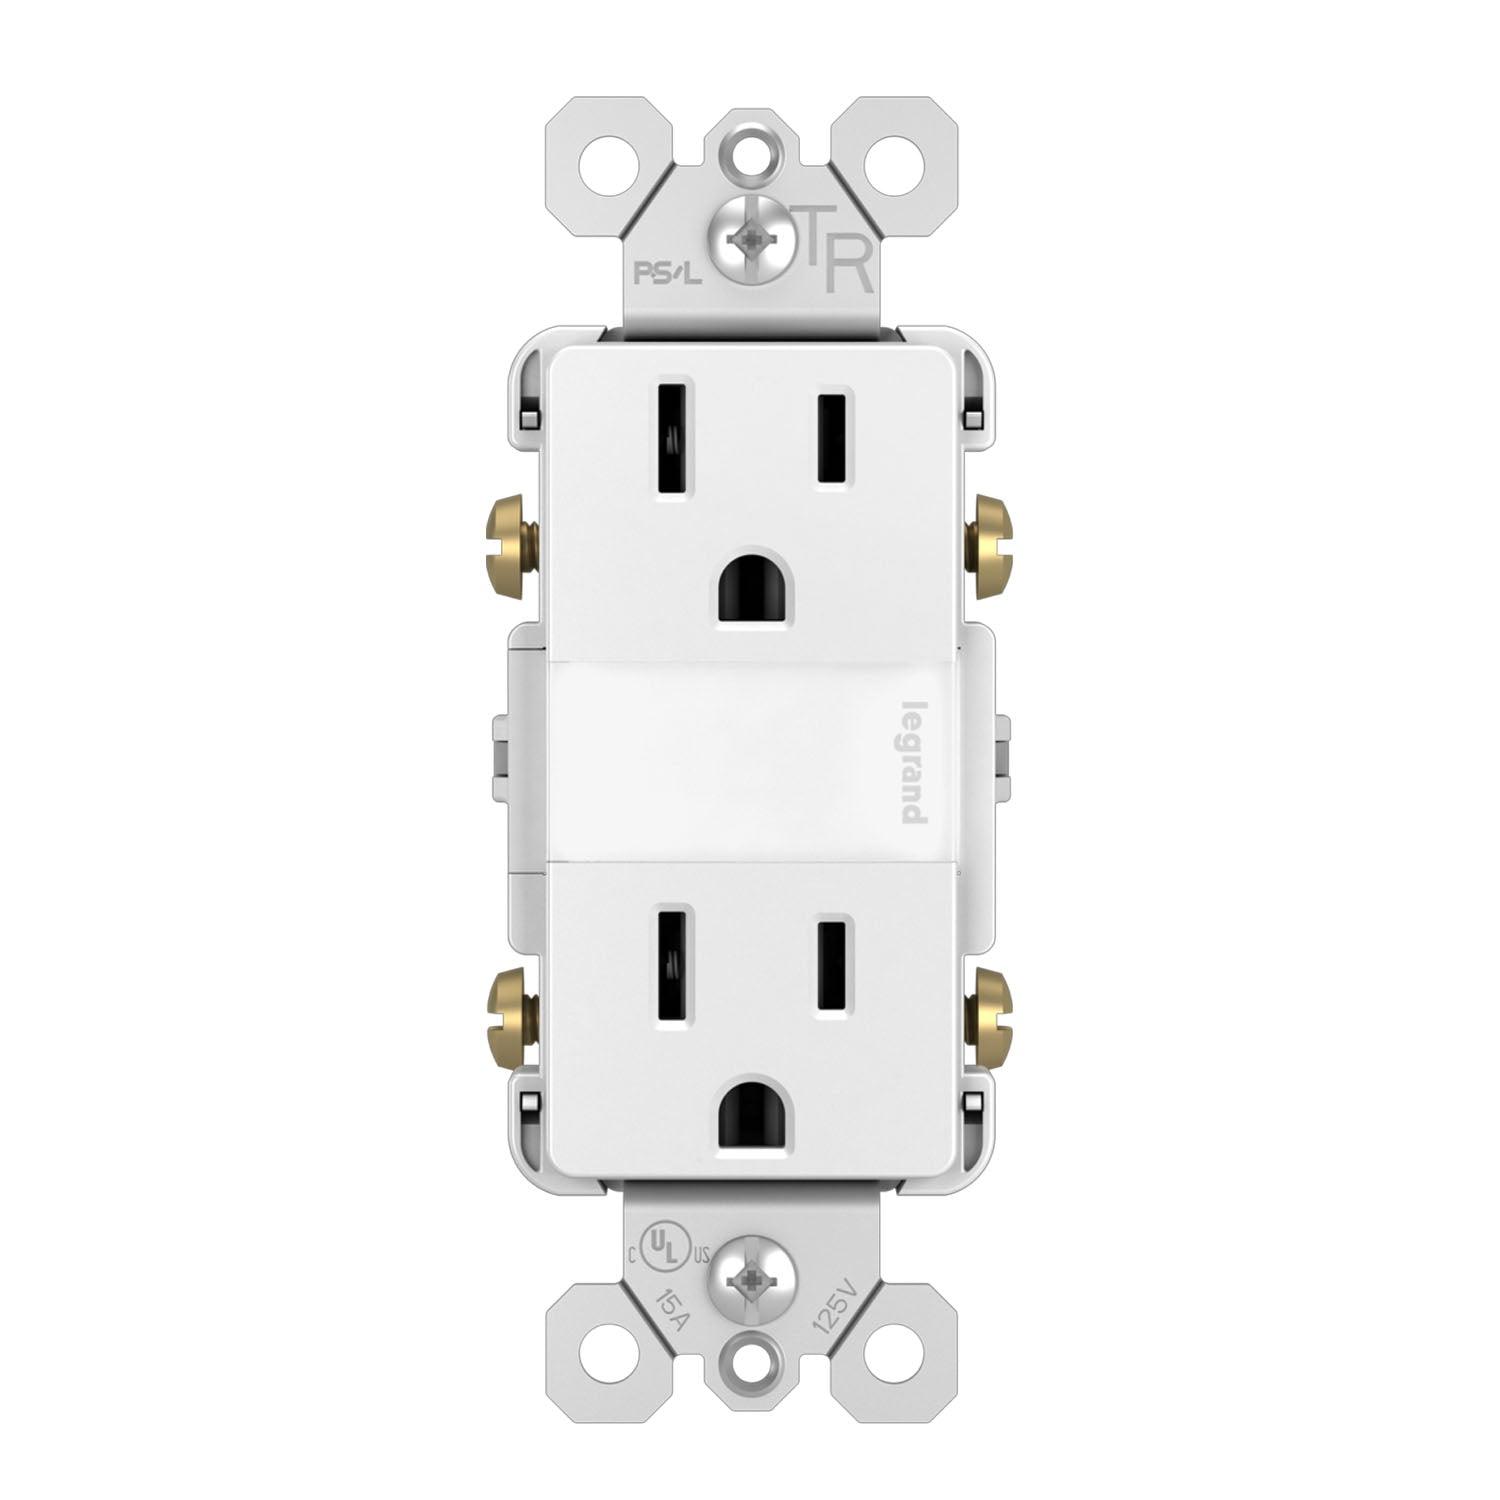 Radiant 15 Amp Duplex Outlet Tamper-Resistant with Night Light White - Bees Lighting